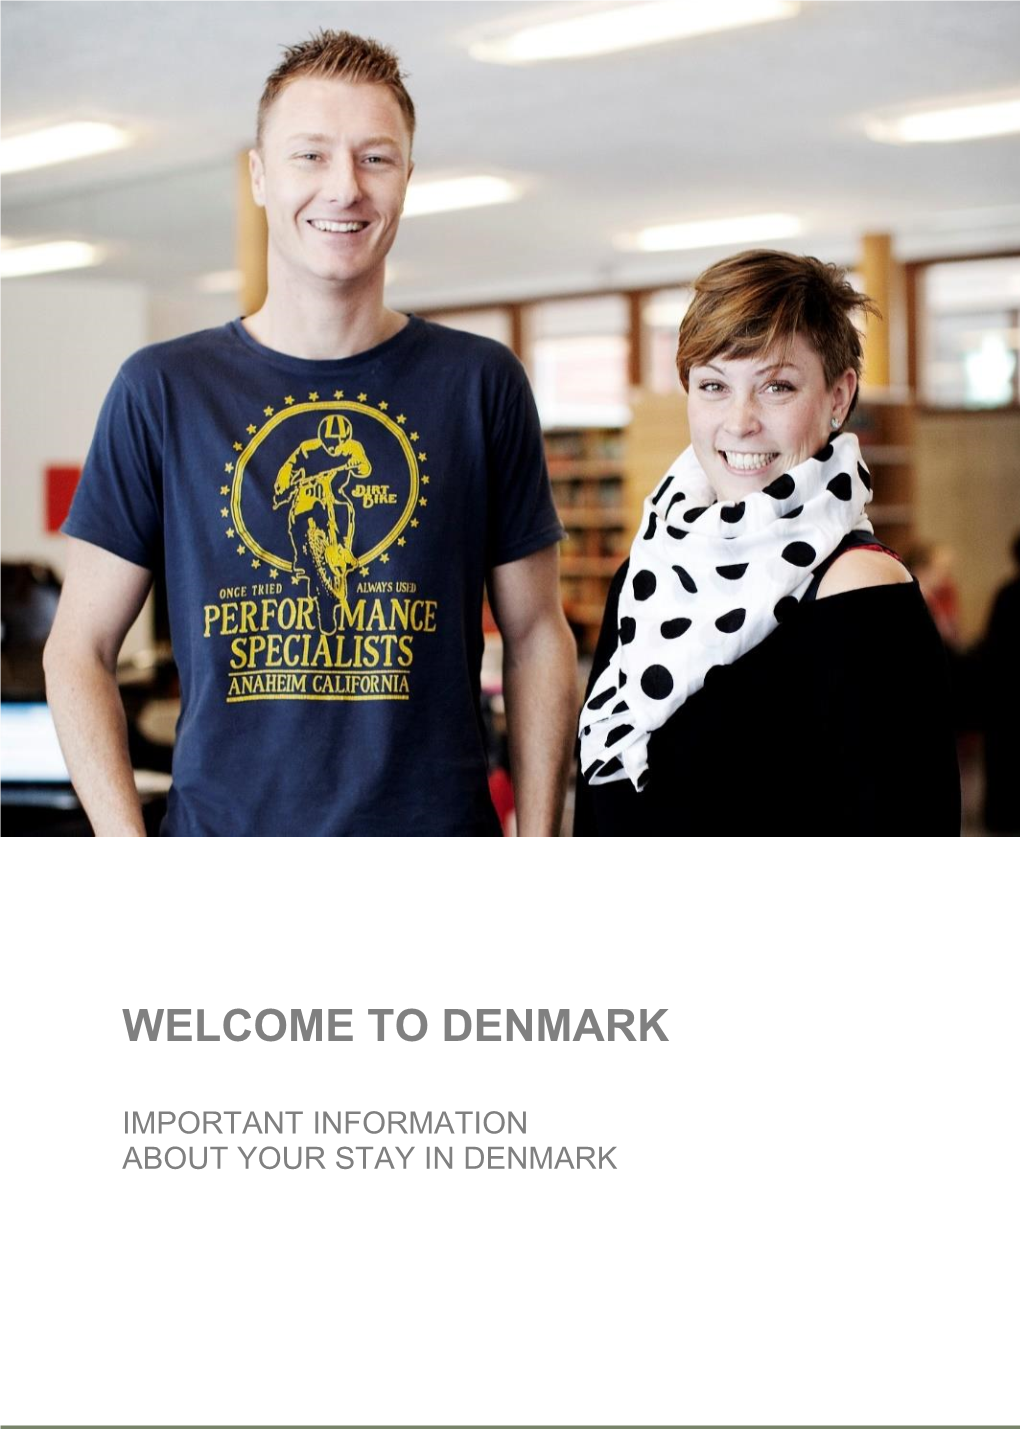 Welcome to Denmark